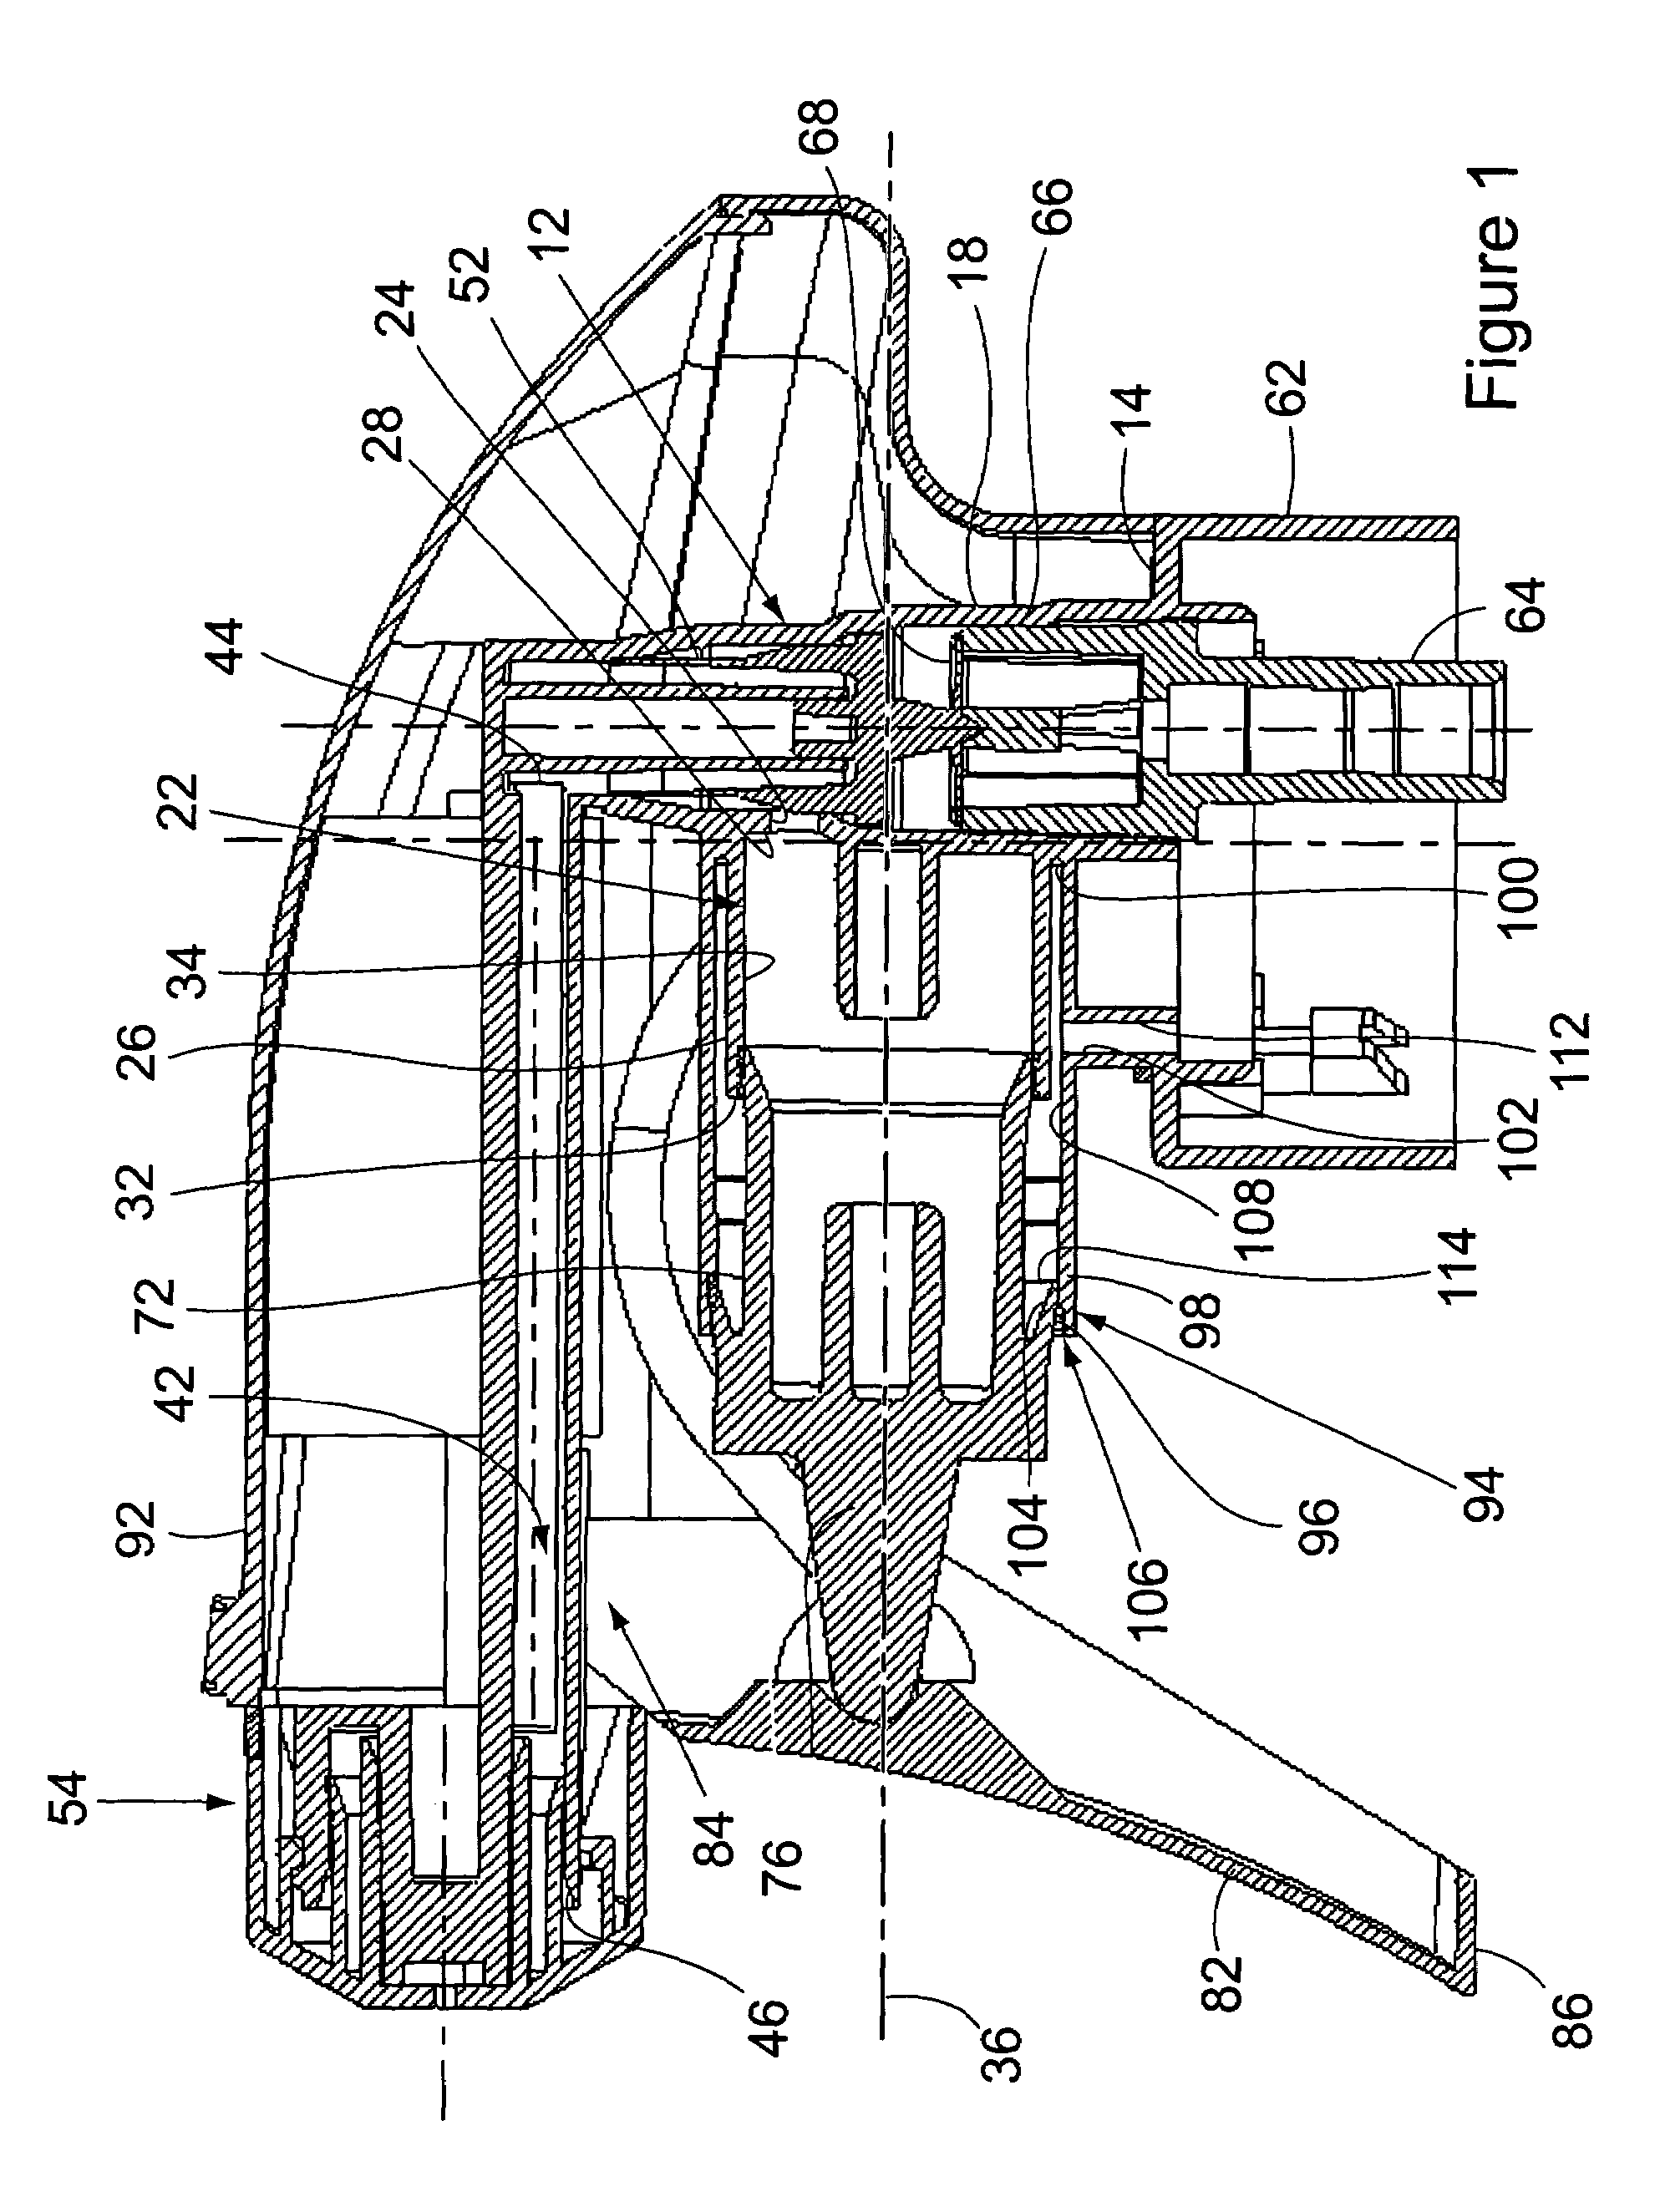 Trigger sprayer venting system with reduced drag on vent piston